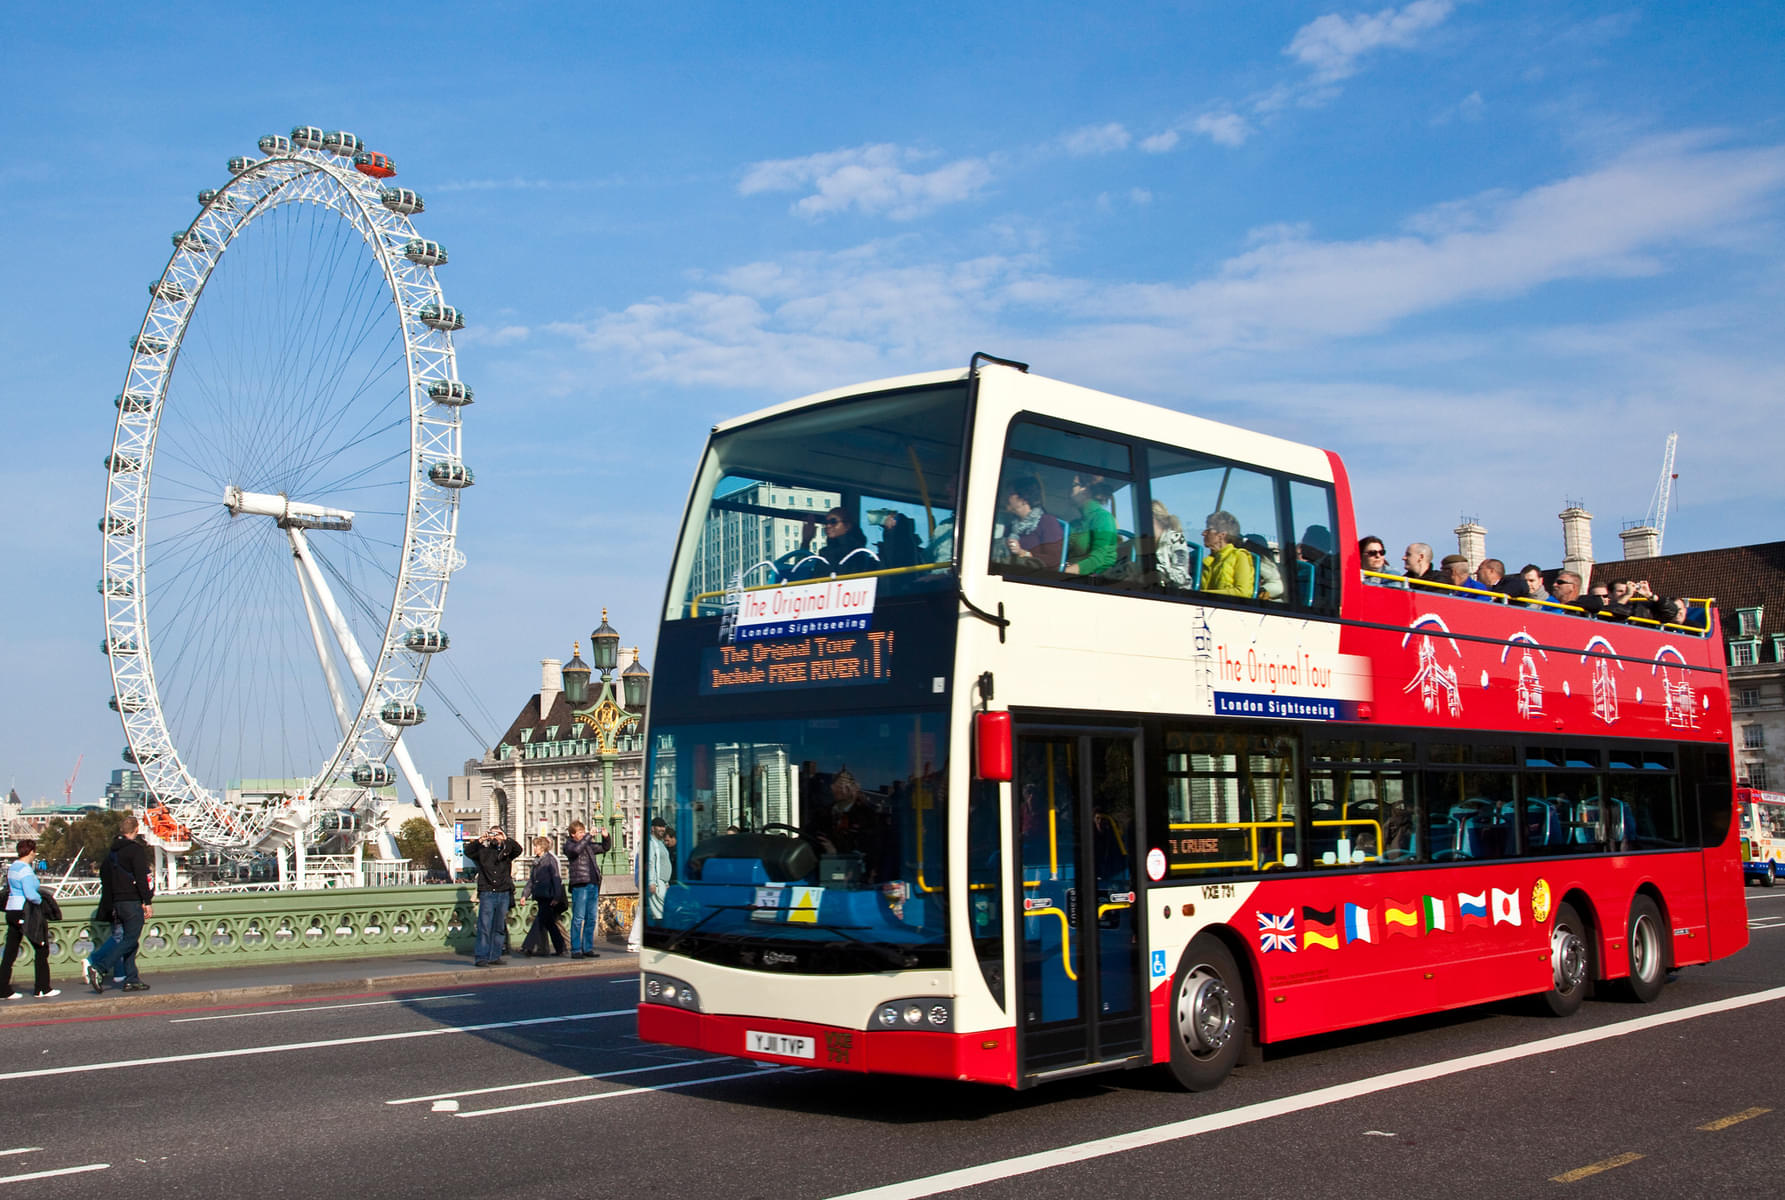 Explore the city of London with a hop-on hop-off bus